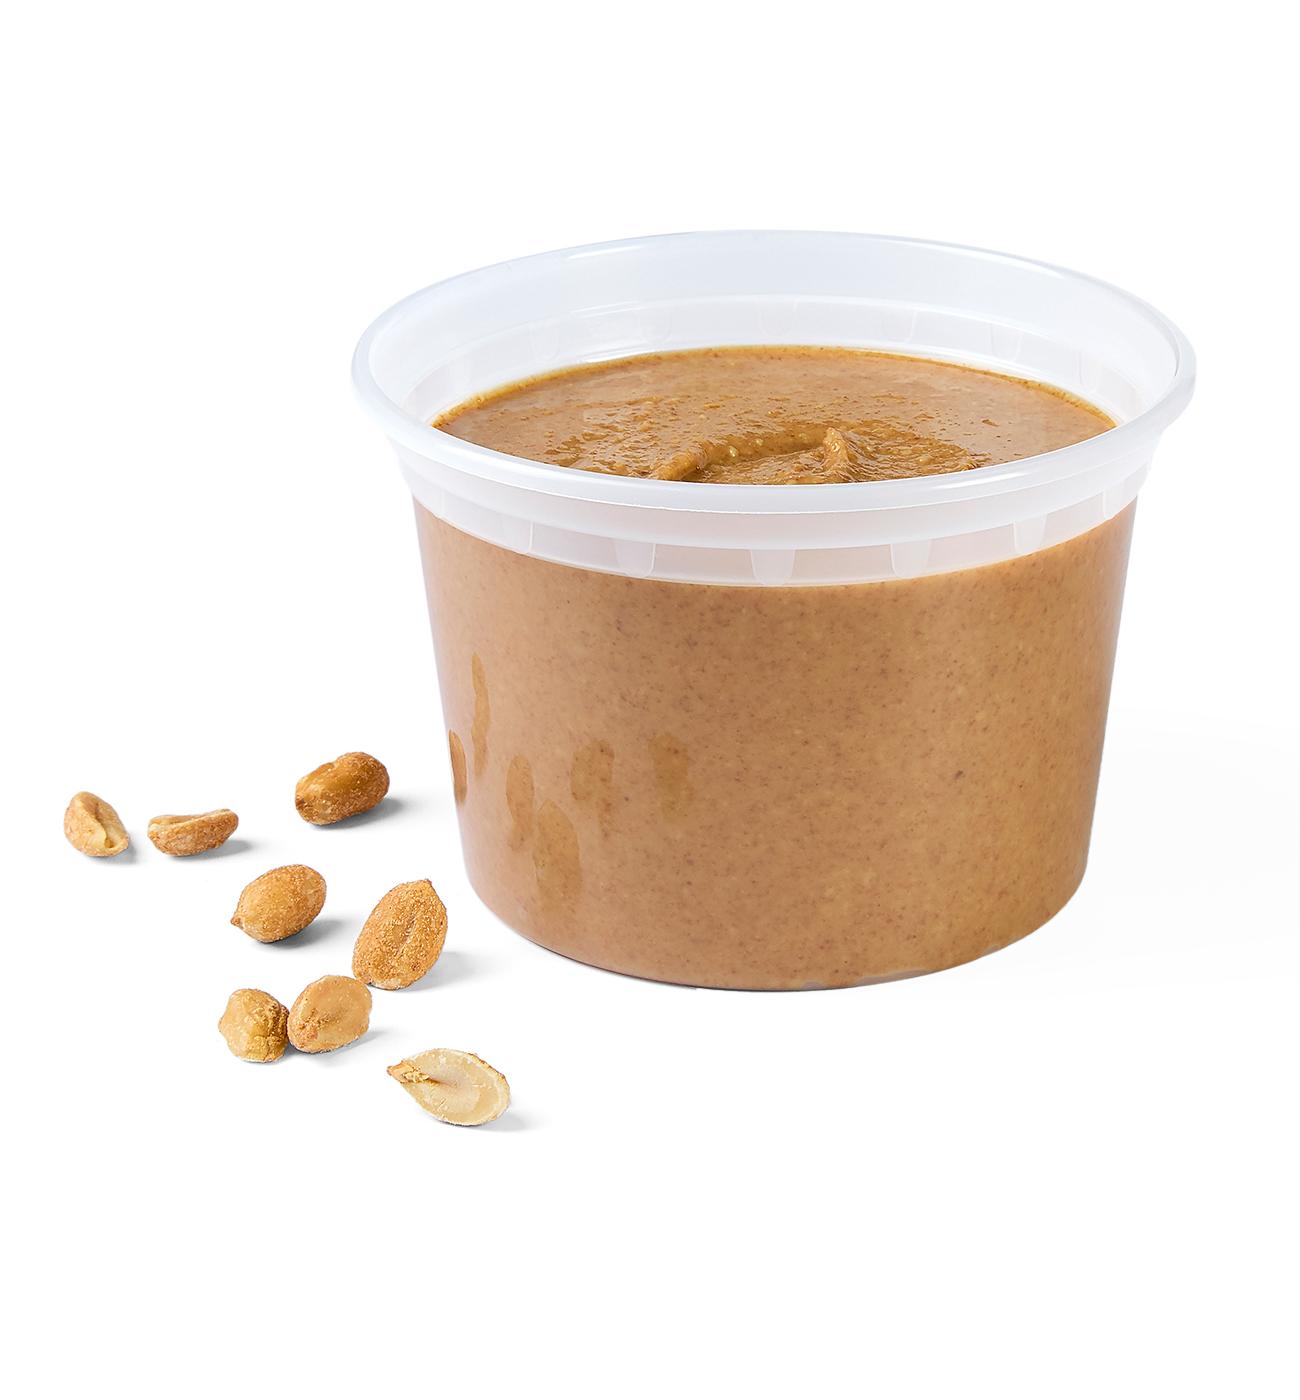 H-E-B Unsalted Peanut Butter; image 1 of 3